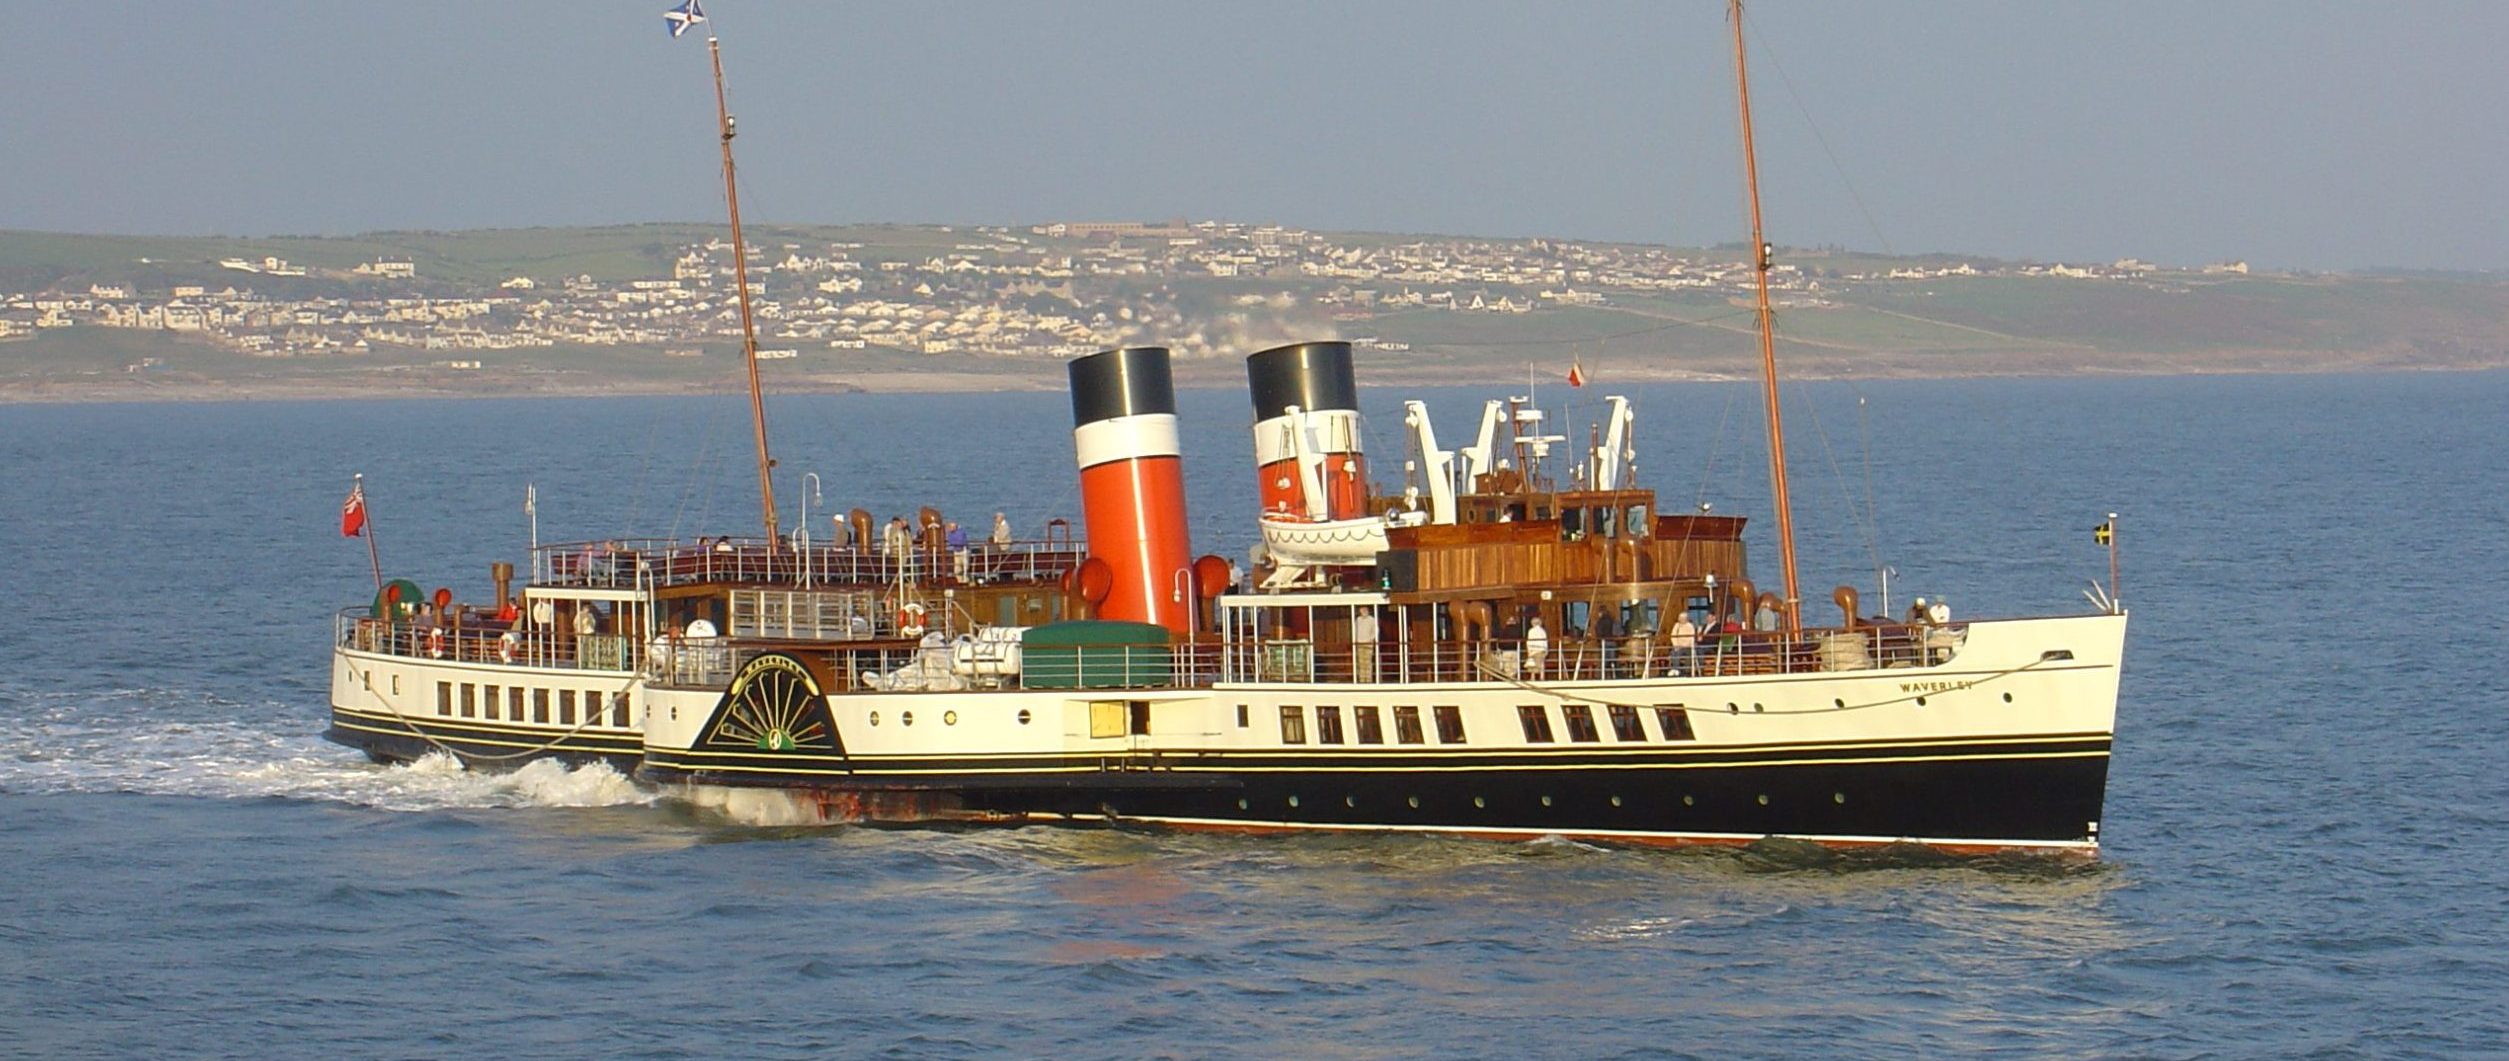 waverley excursions isle of wight